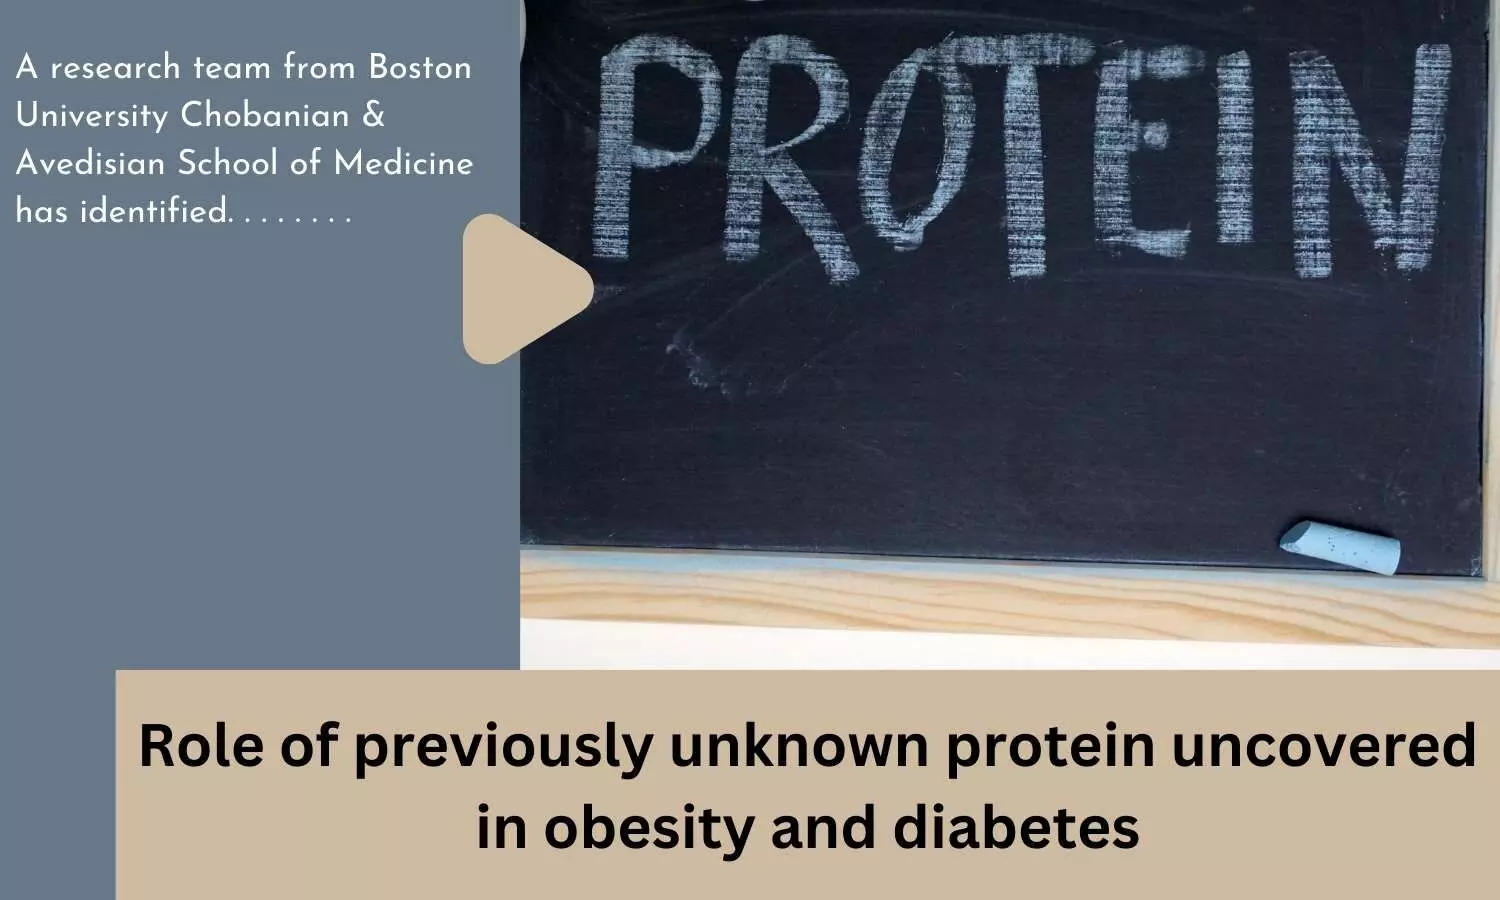 Role of previously unknown protein uncovered in obesity and diabetes